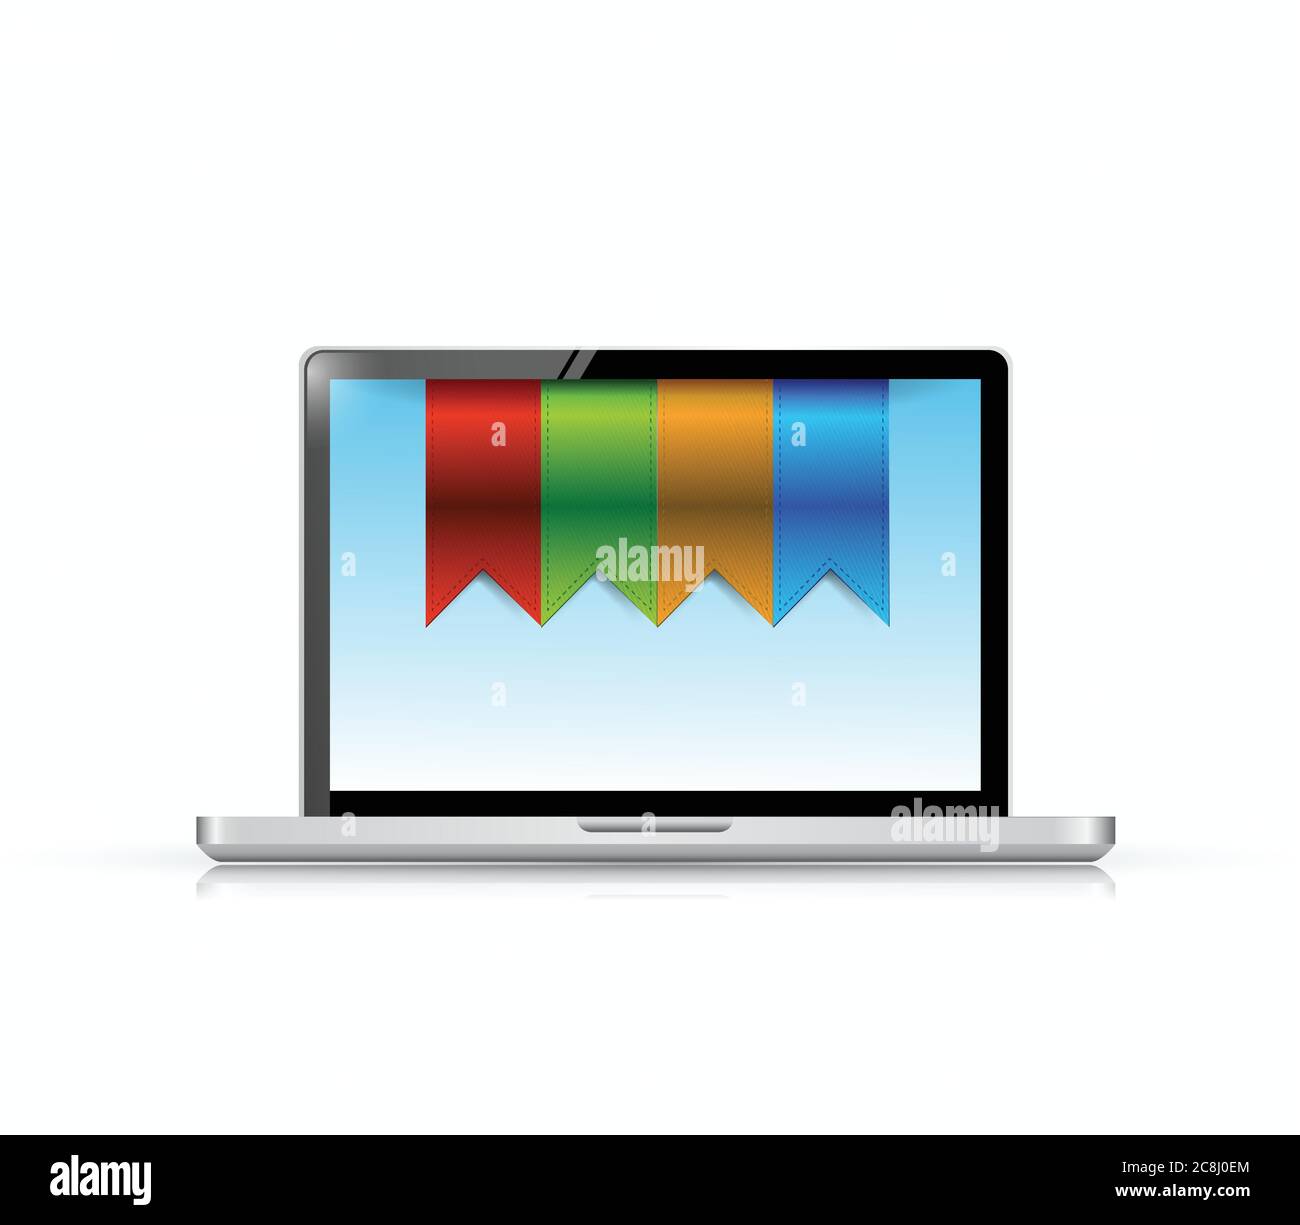 Laptop and hanging banners illustration design over a white background Stock Vector